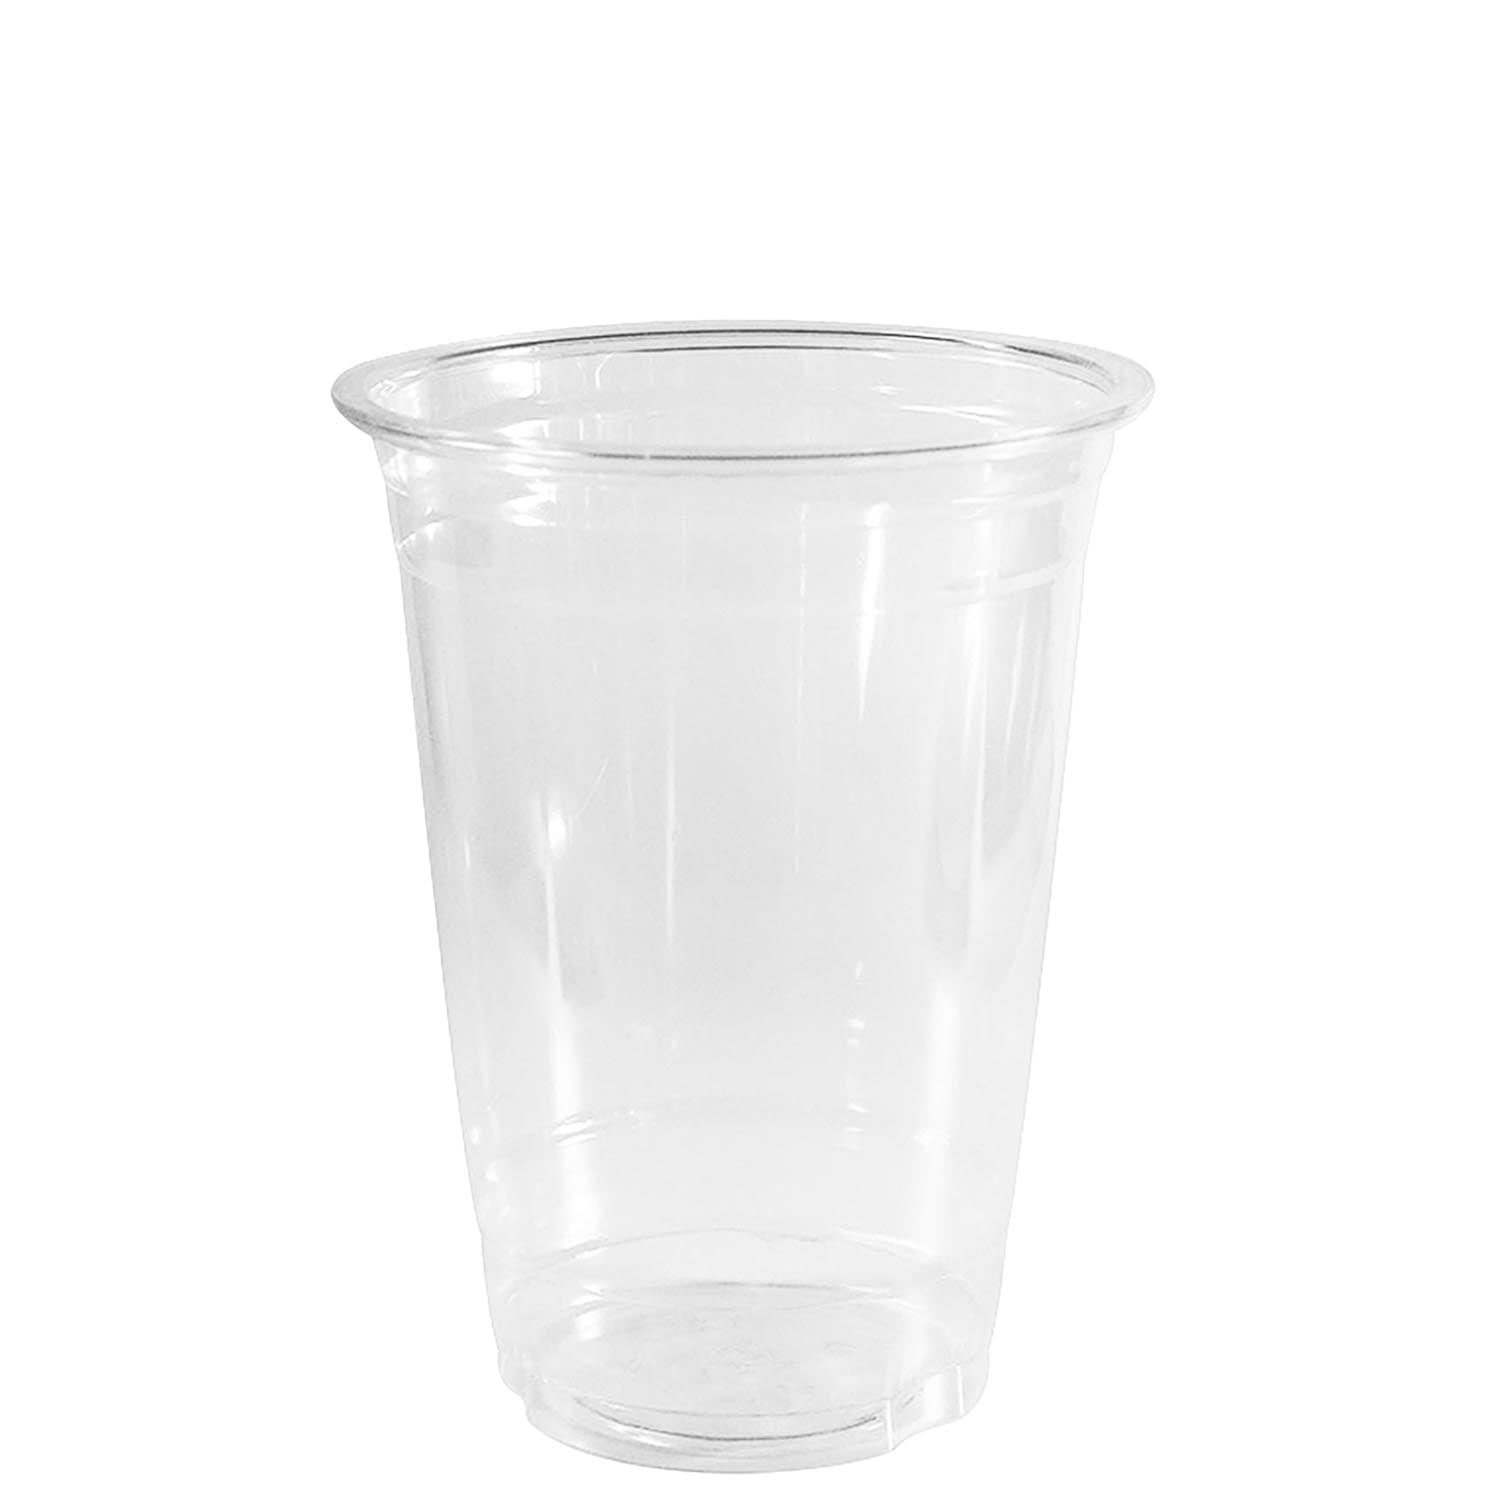 PAMI Blue Plastic Party Cups [Pack of 50] - 16oz Disposable Drinking  Glasses- Colored Plastic Glasse…See more PAMI Blue Plastic Party Cups [Pack  of